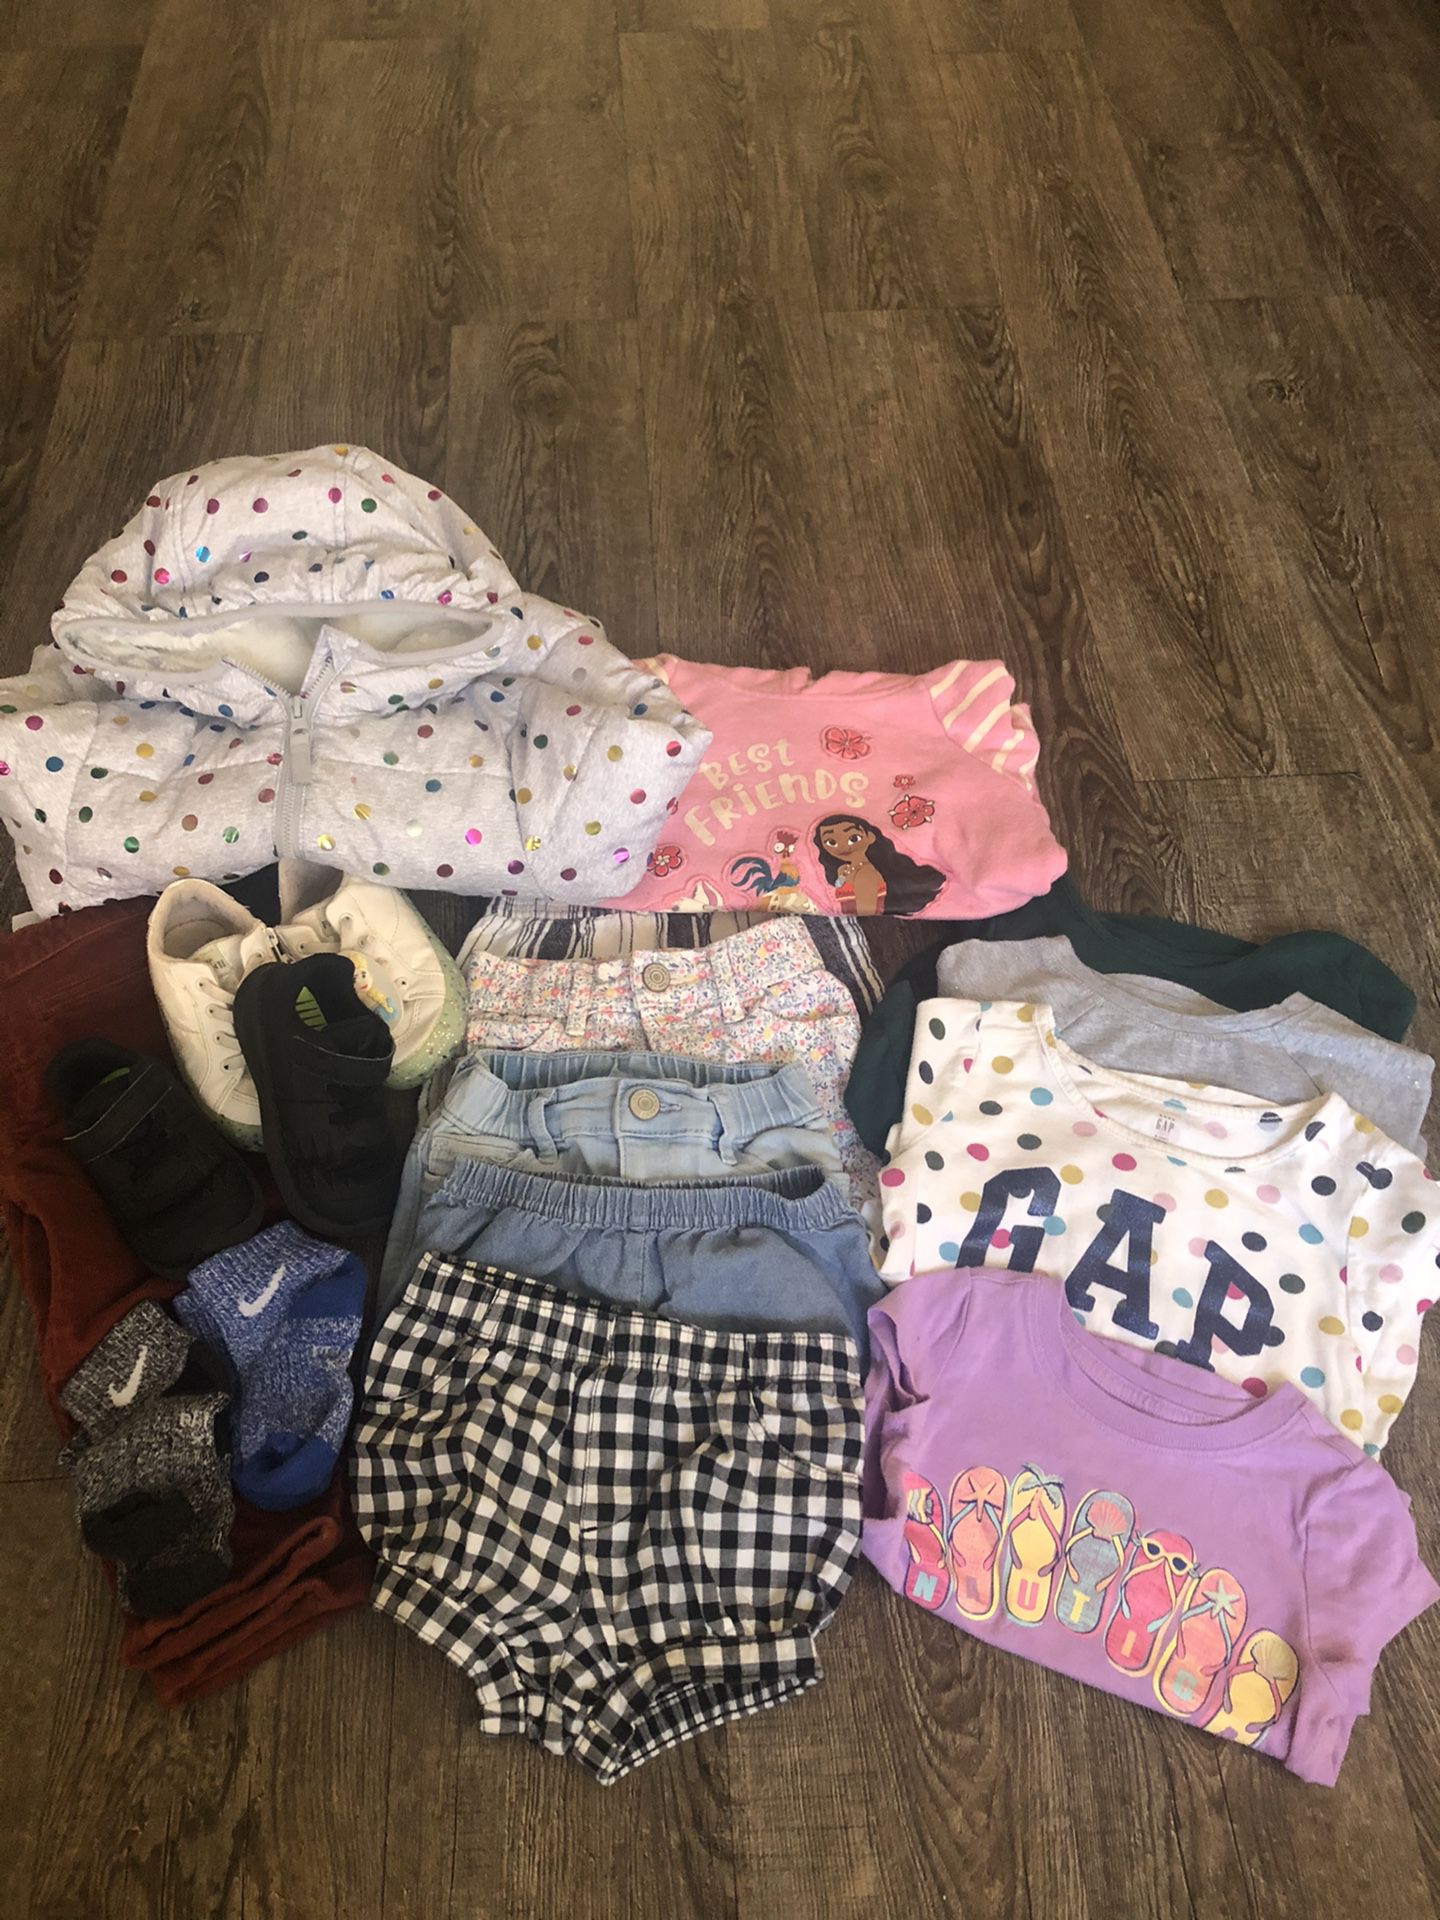 Gently used girl clothes and shoes.